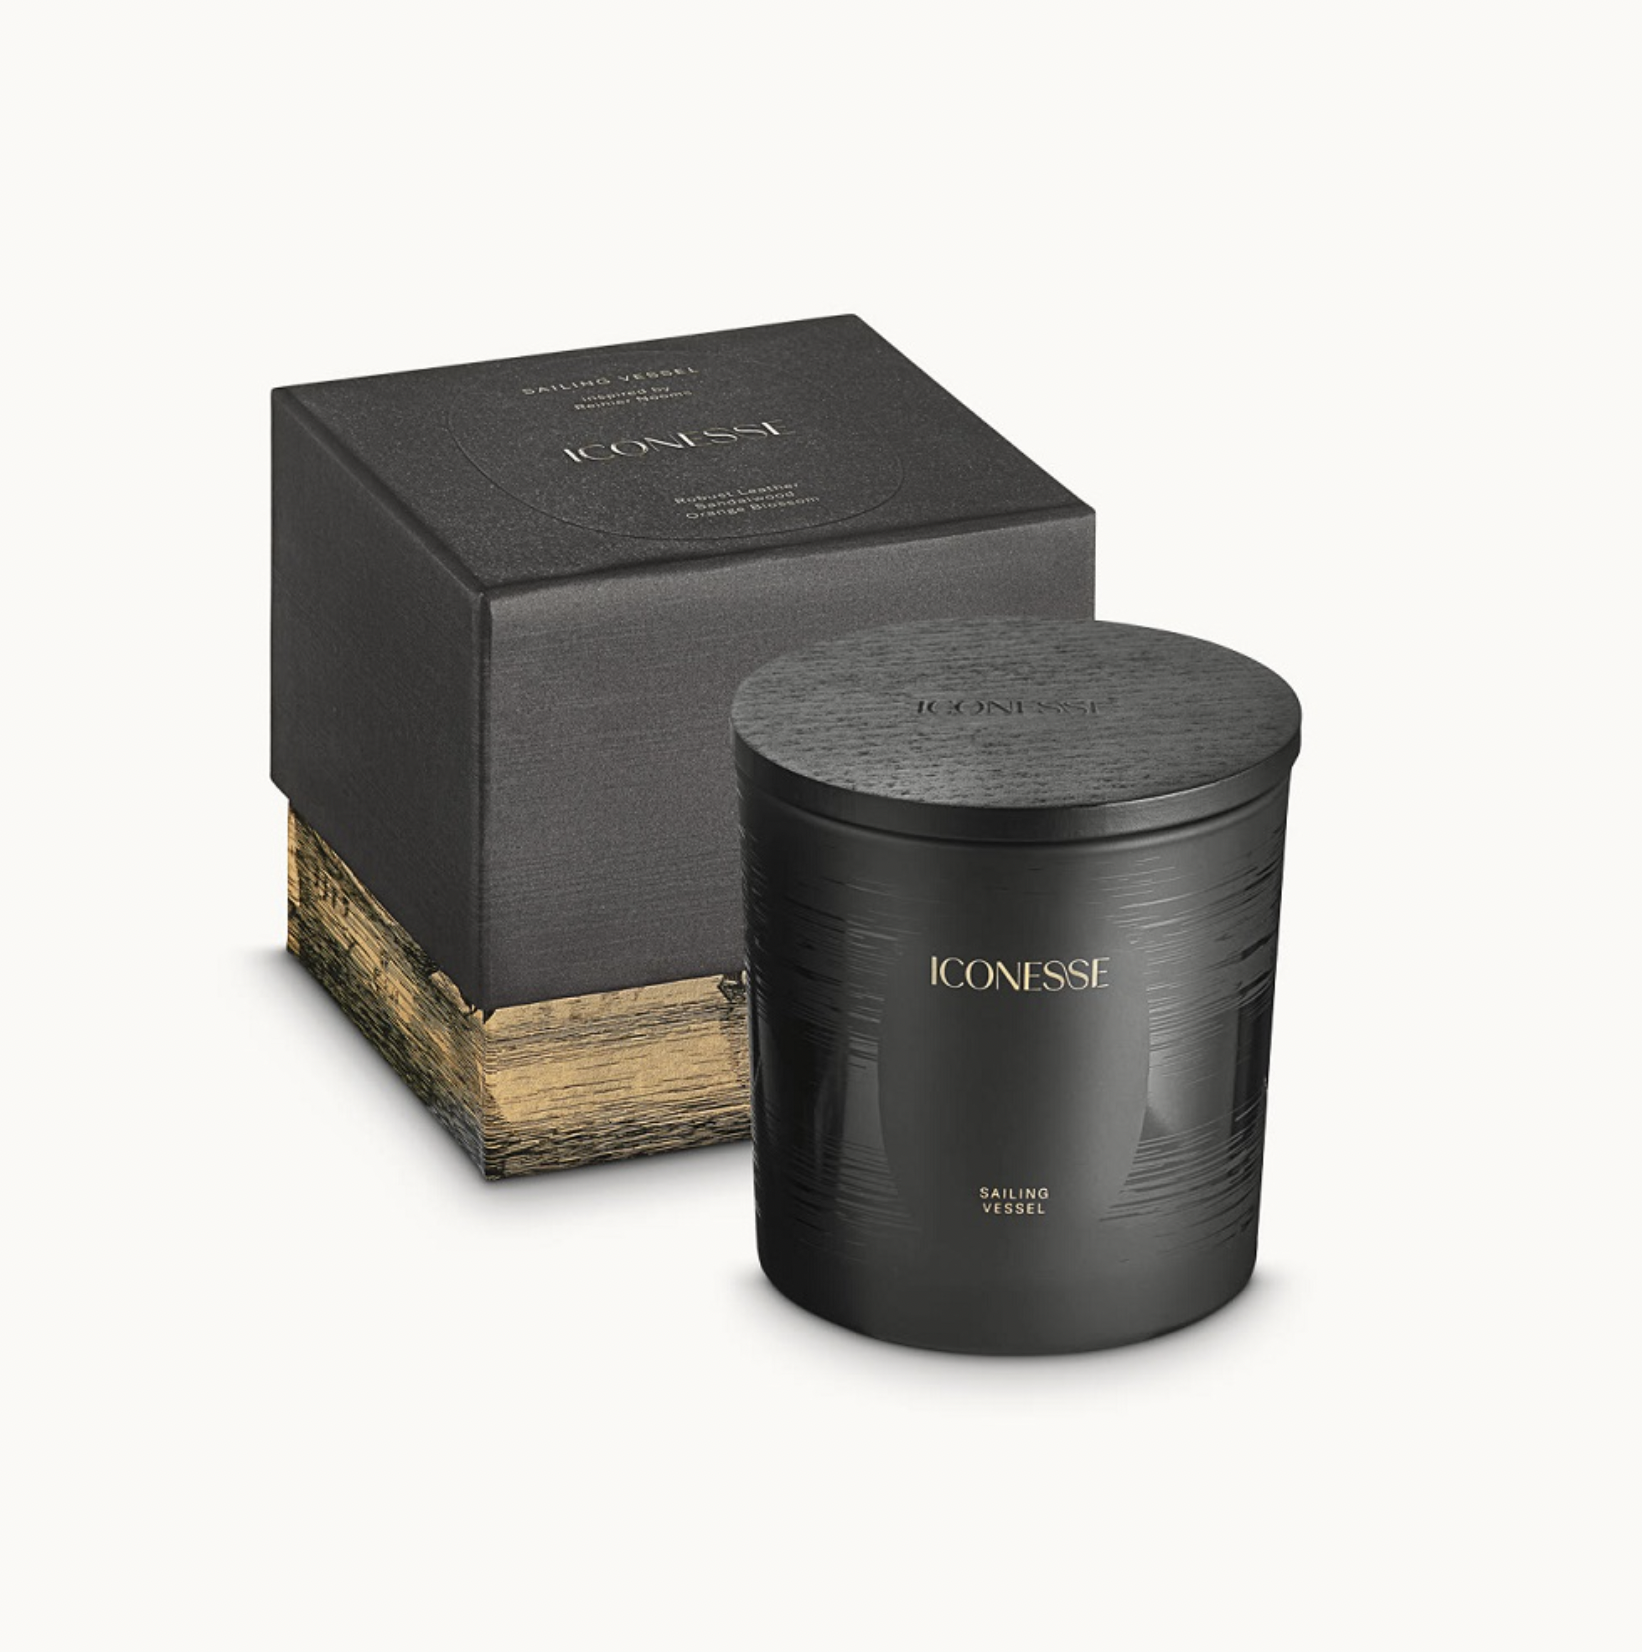 ICONESSE SAILING VESSEL SCENTED CANDLE